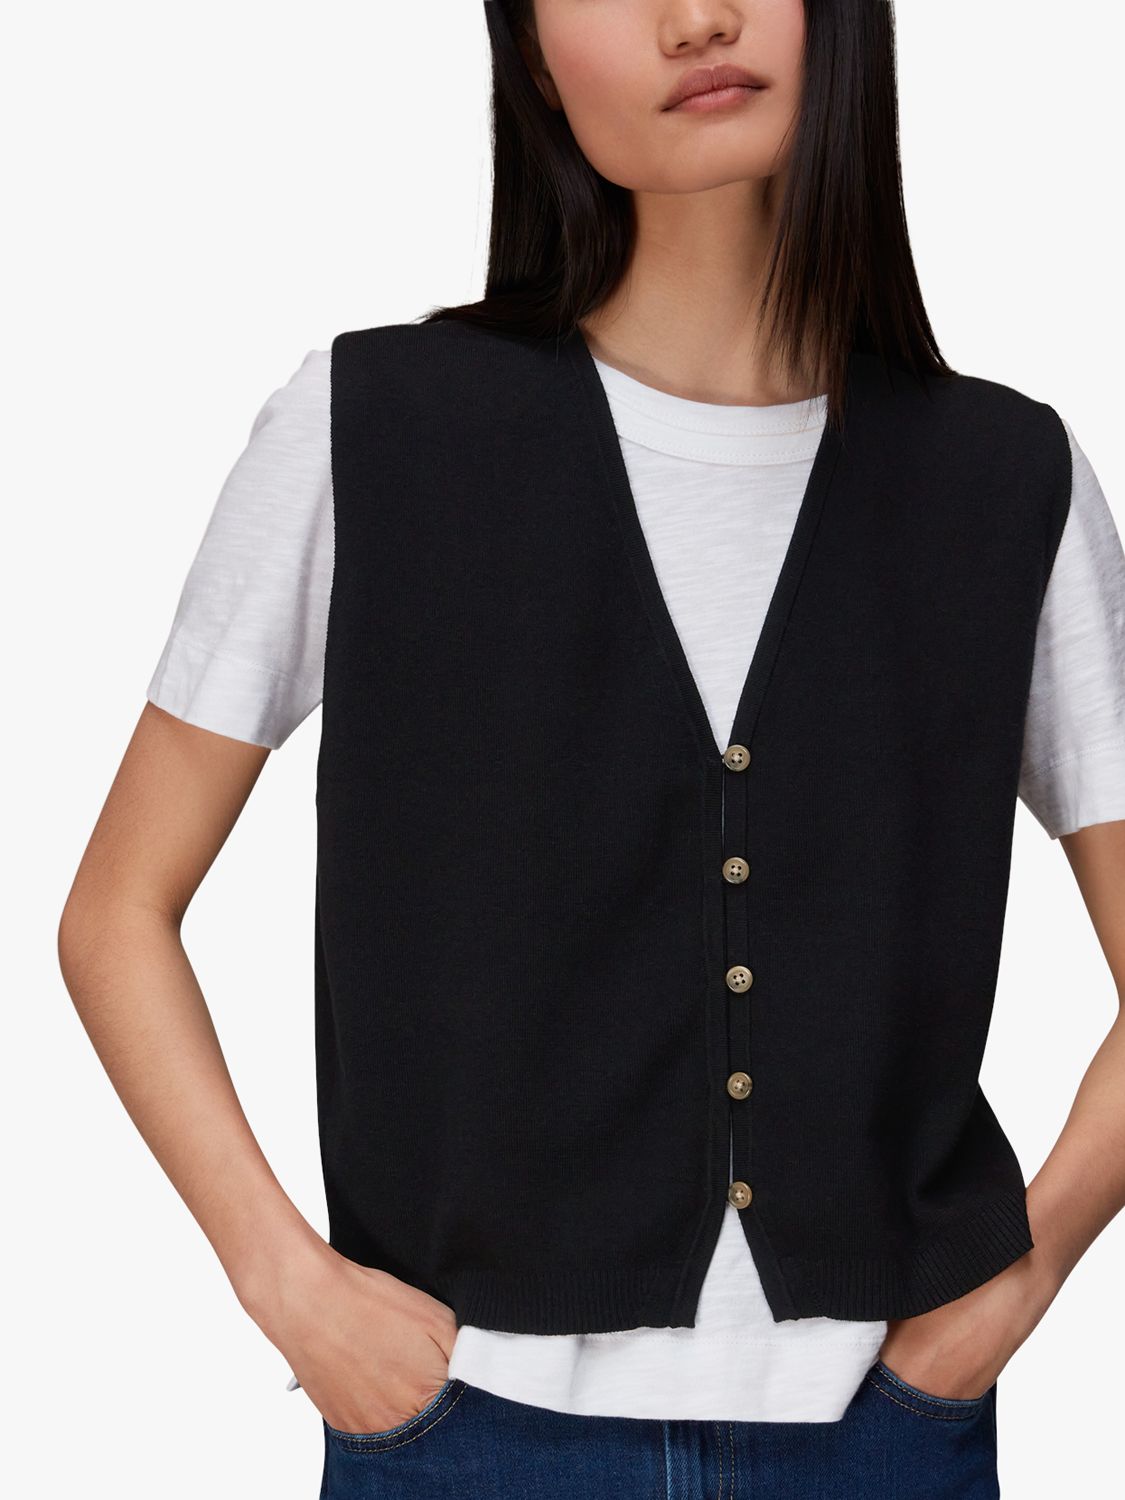 Lady V-Neck Sweater Vest Top Japanese Knitted Tank Top Women Pullover  Waistcoat 